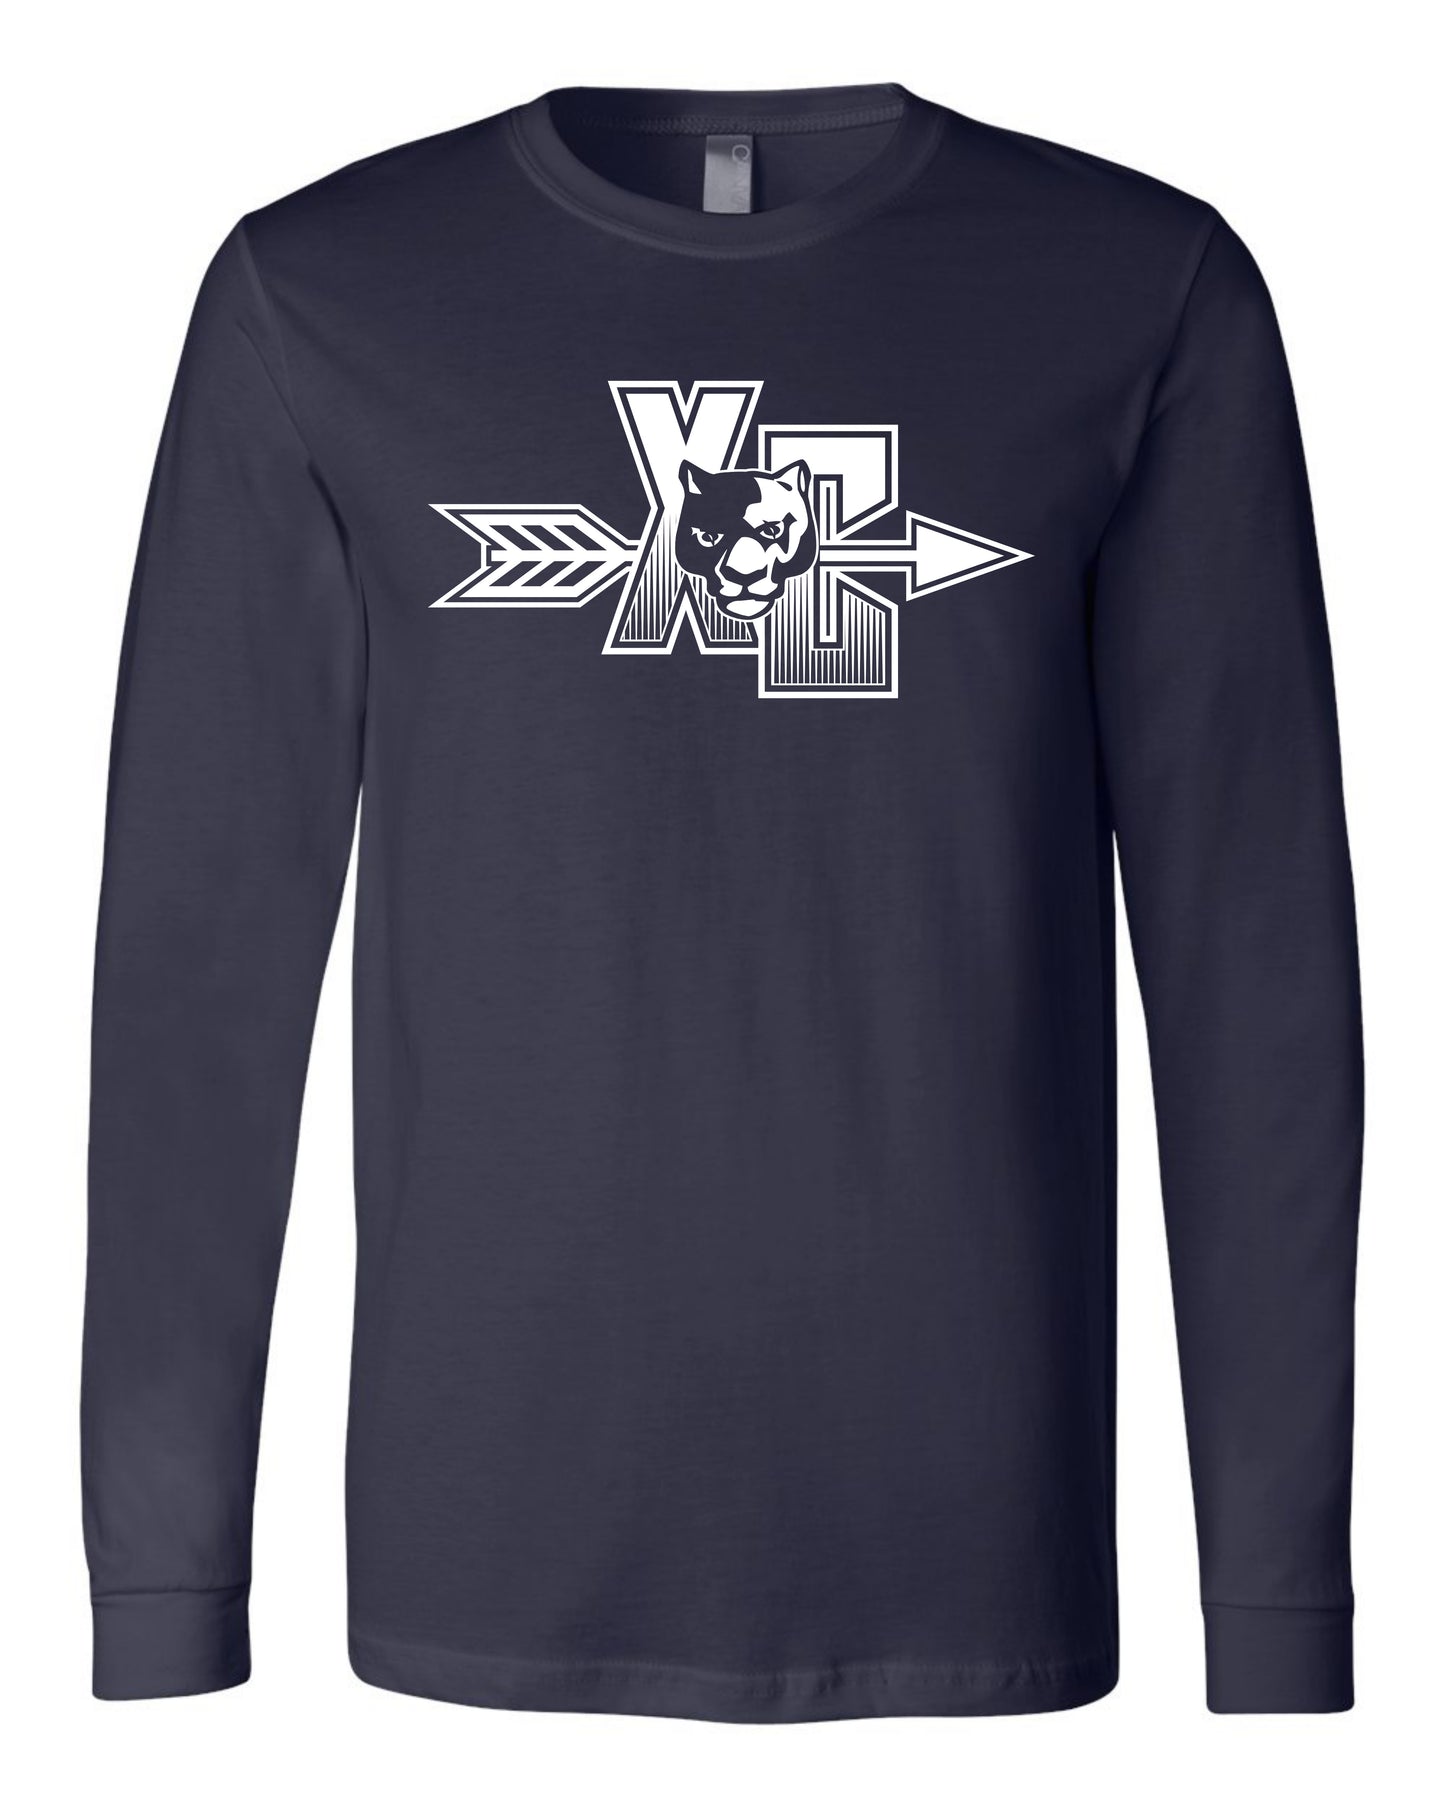 XC Panther Head - Adult Long Sleeve